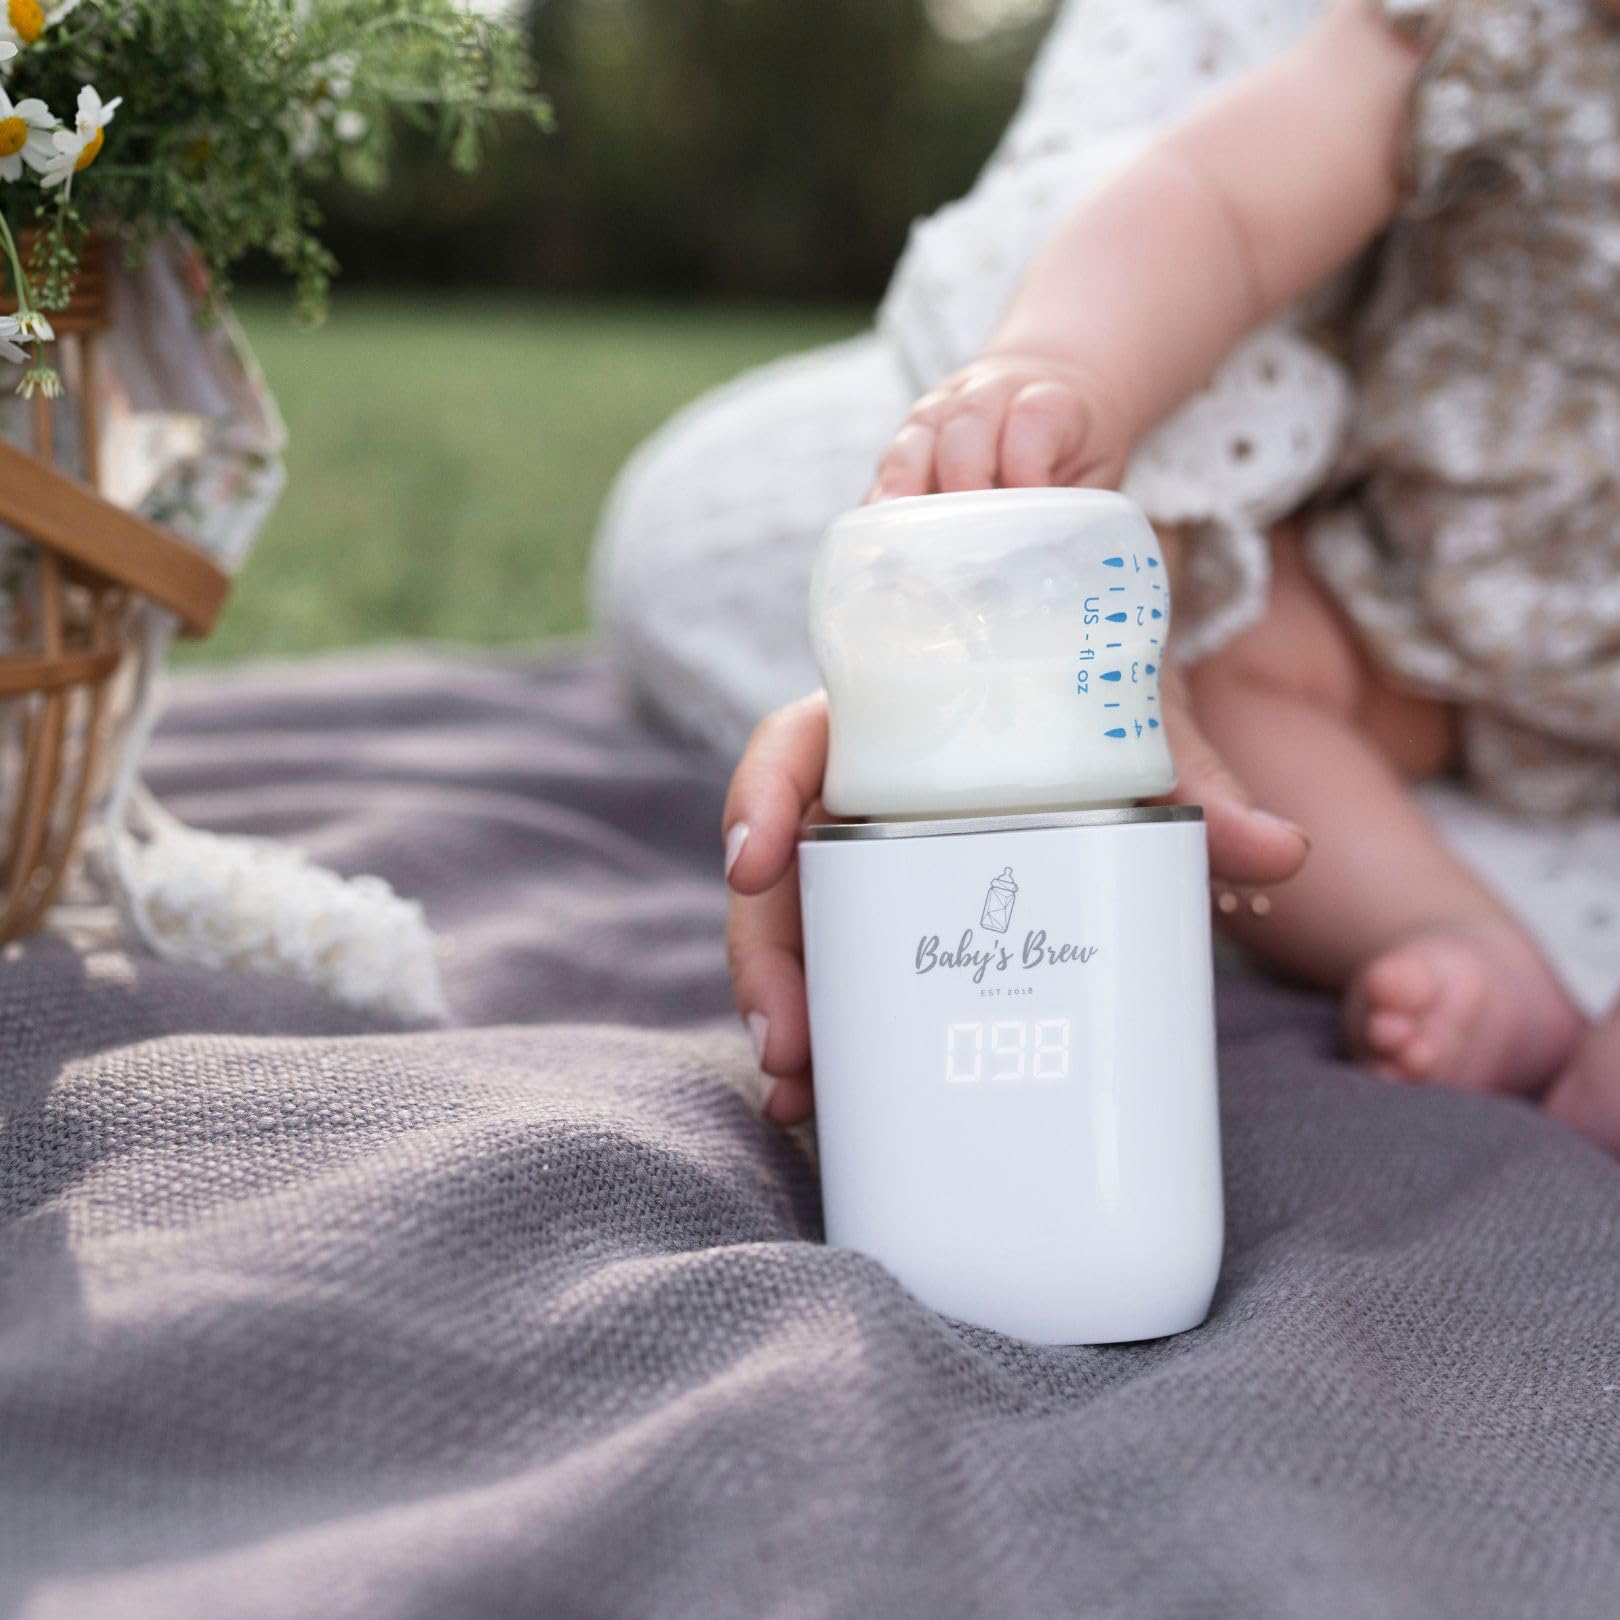 Baby's Brew Portable Bottle Warmer Pro - Milk Warmers for Breastmilk or Formula, Leak-Proof Design, Travel-Friendly, Cordless, Battery-Powered, 8-12 Hour Battery Life, Warmer Only